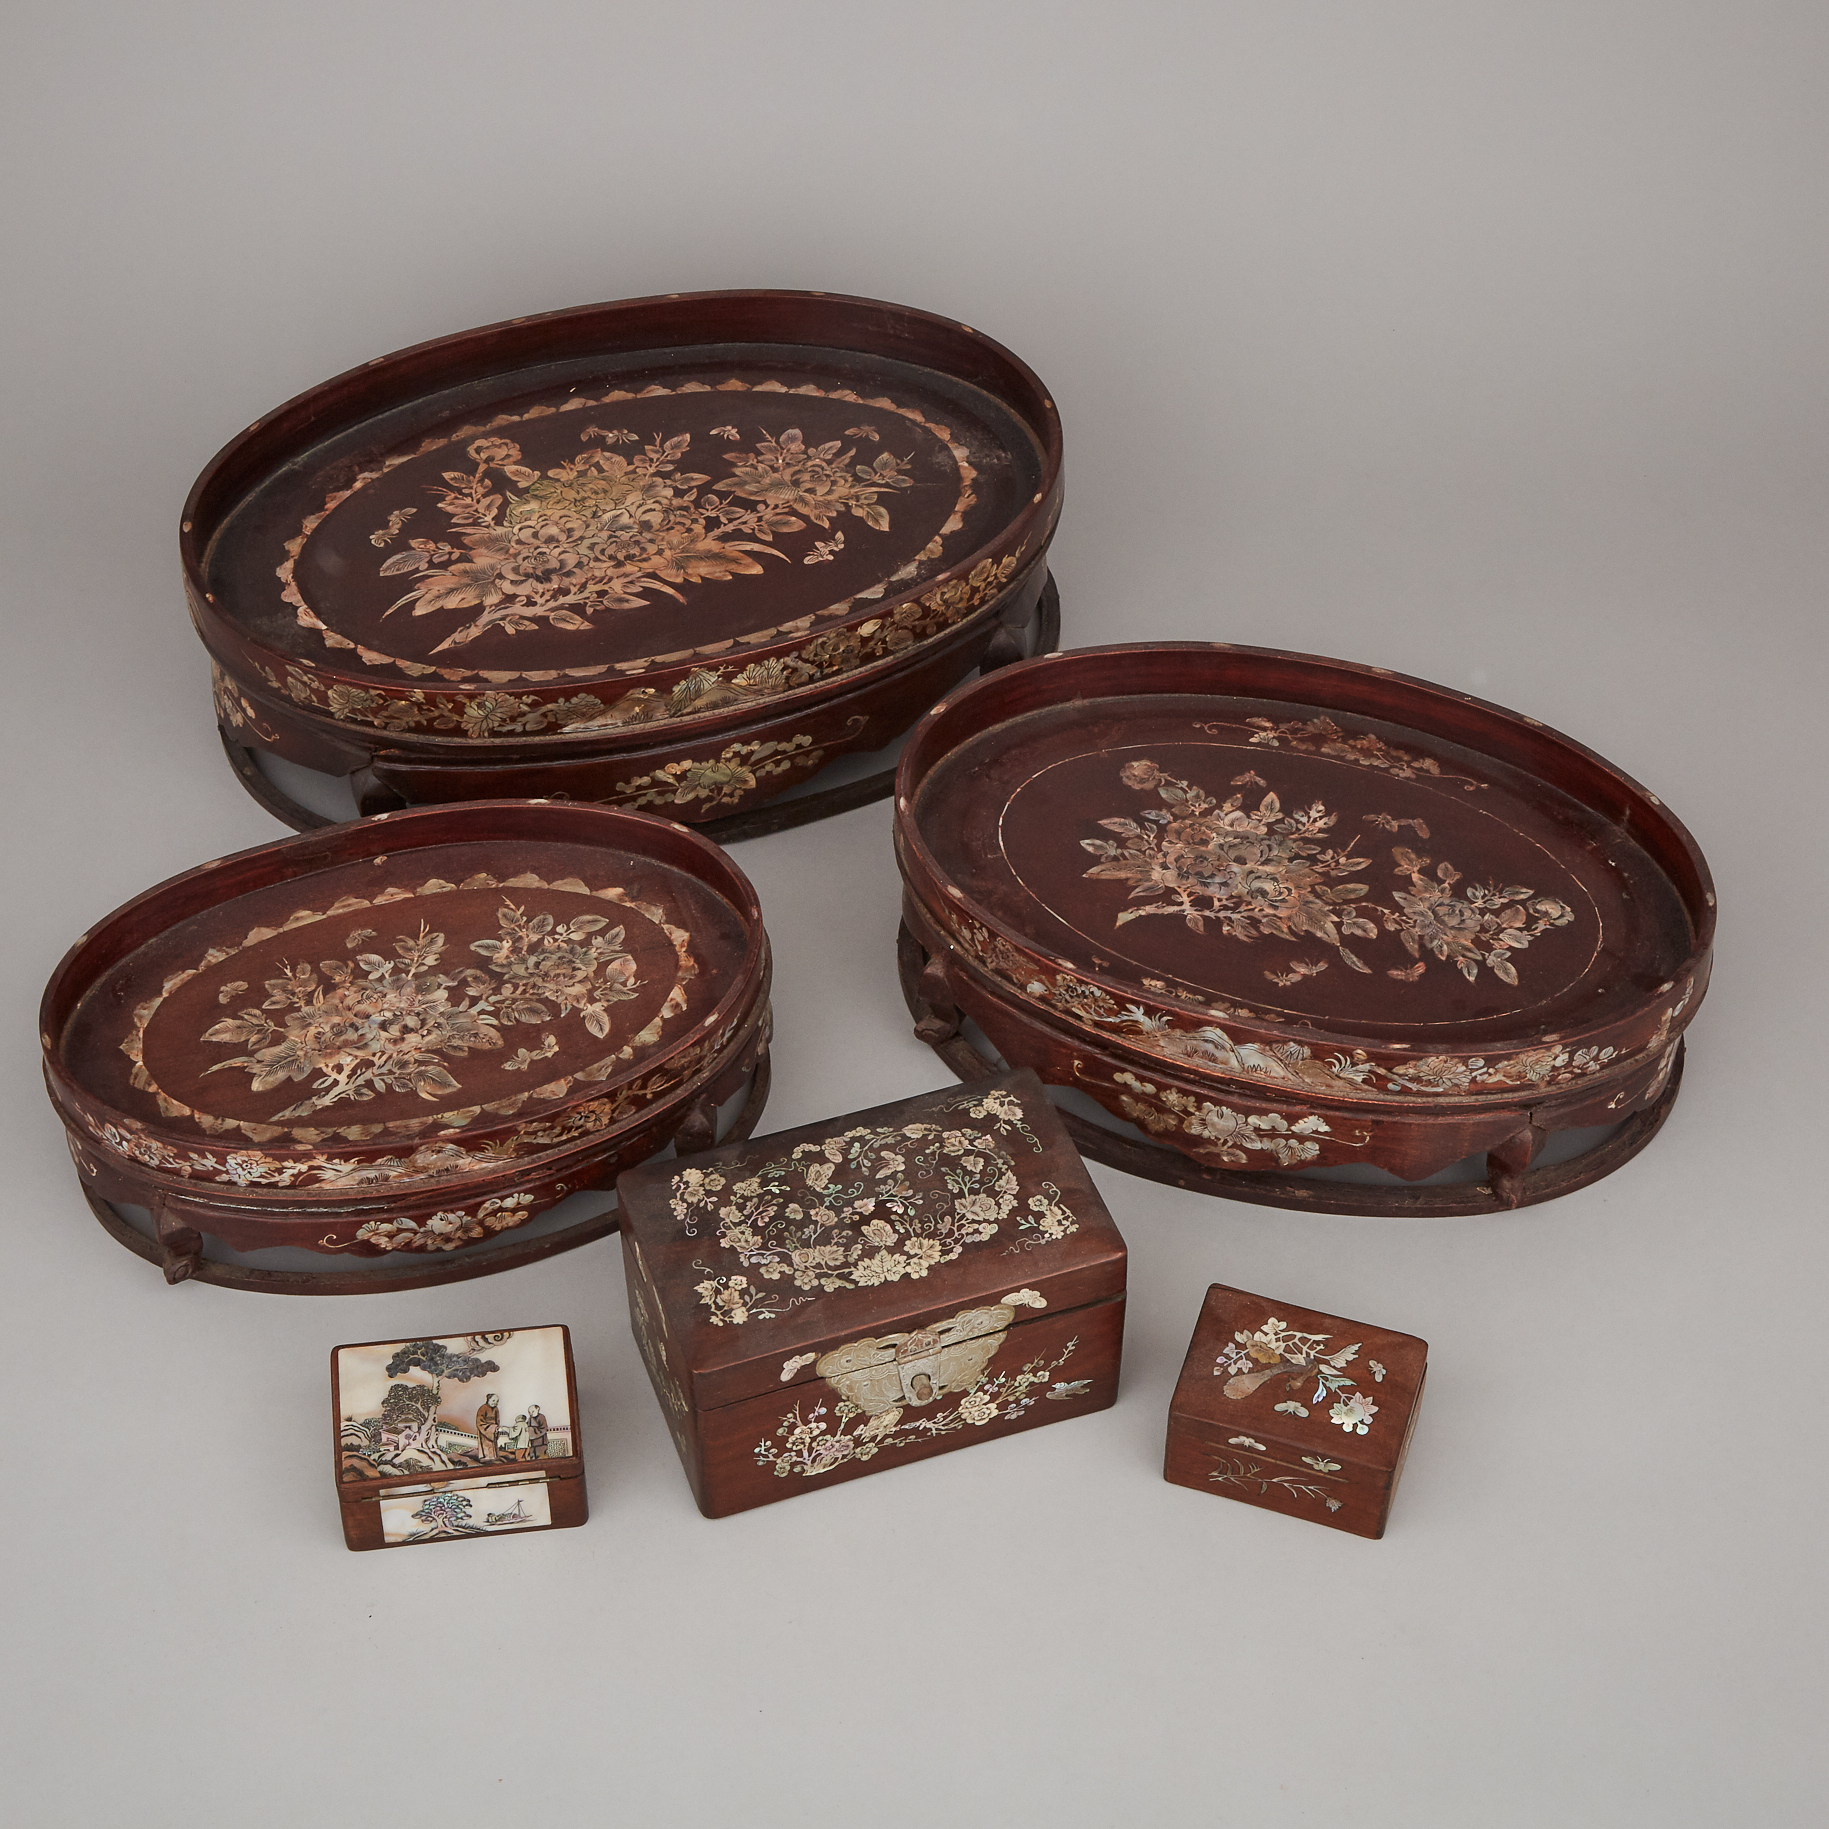 A Group of Six Mother-of-Pearl Inlaid Boxes and Trays, 19th/Early 20th Century